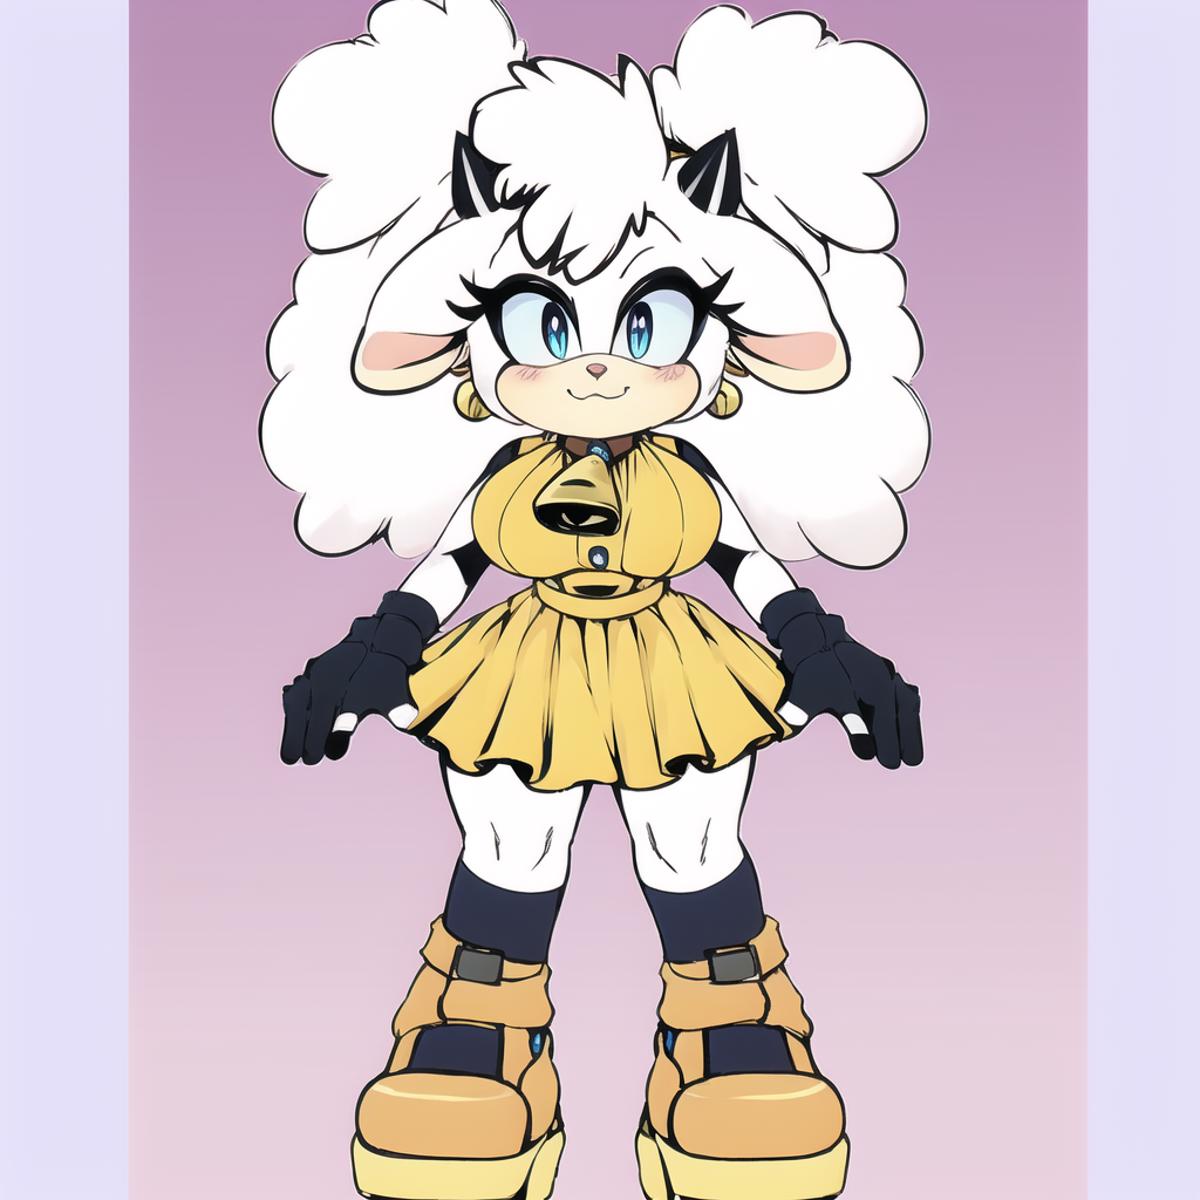 Lanolin the Sheep  image by Aigenerater